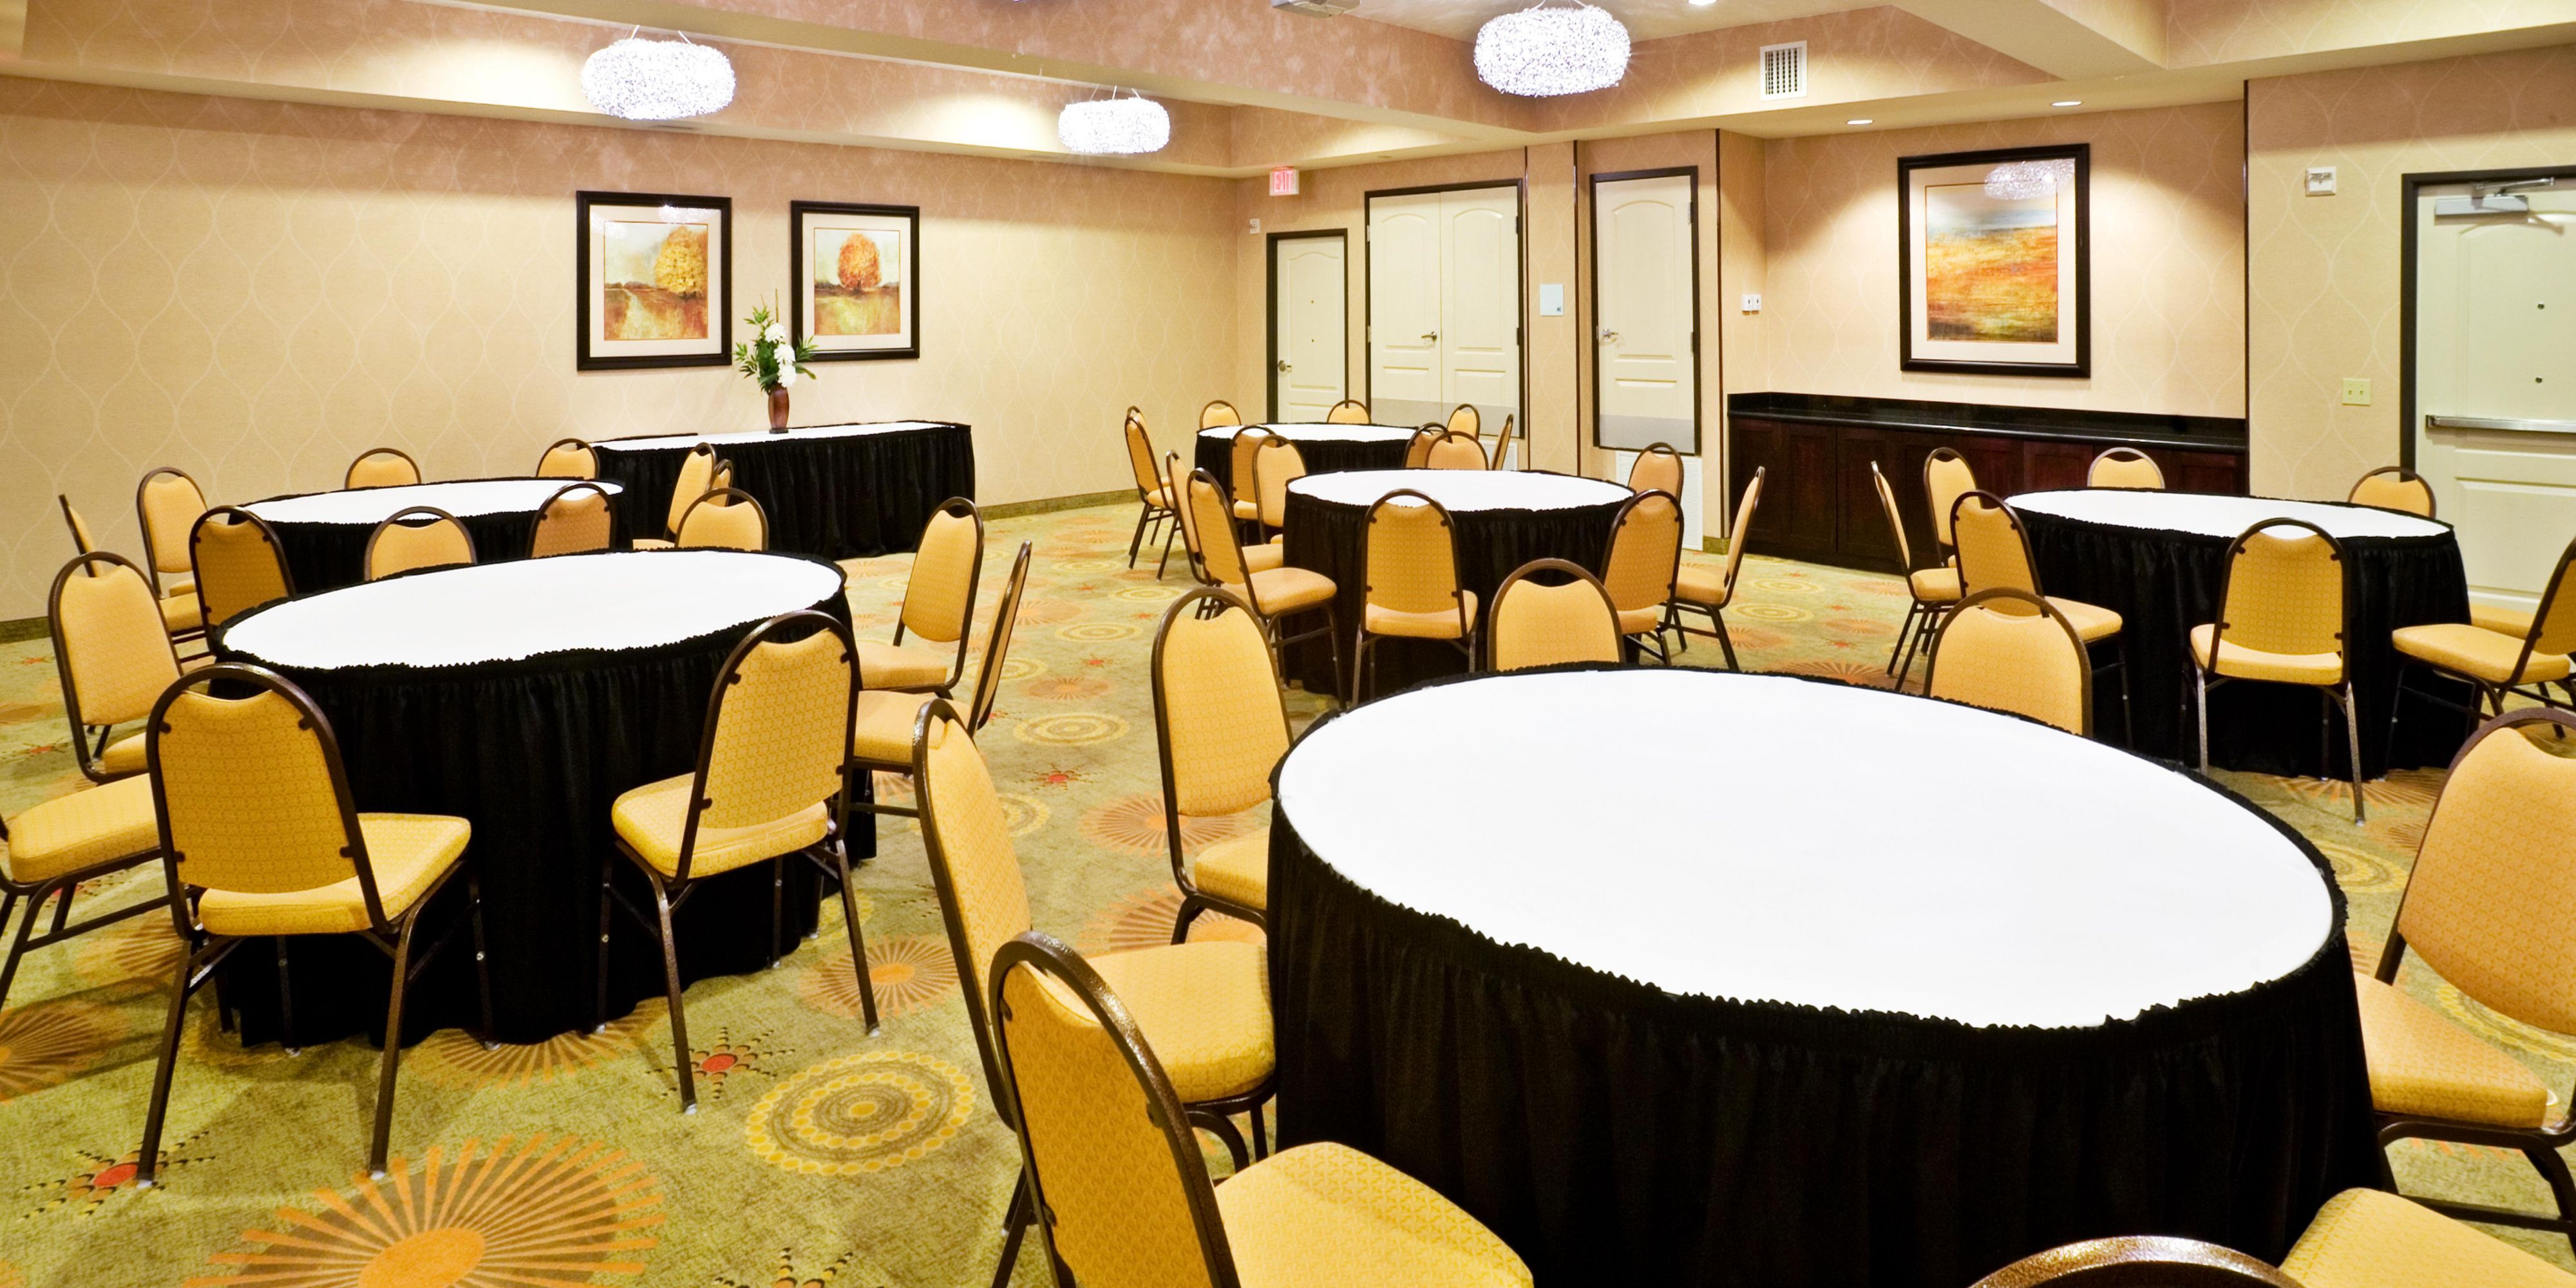 Host a formal business meeting or a unique special occasion in our versatile meeting space, which can accommodate up to 100 people for theater-style seating, 60 people classroom-style seating, and 50 people in rounds. Contact our Sales Office for your next event.